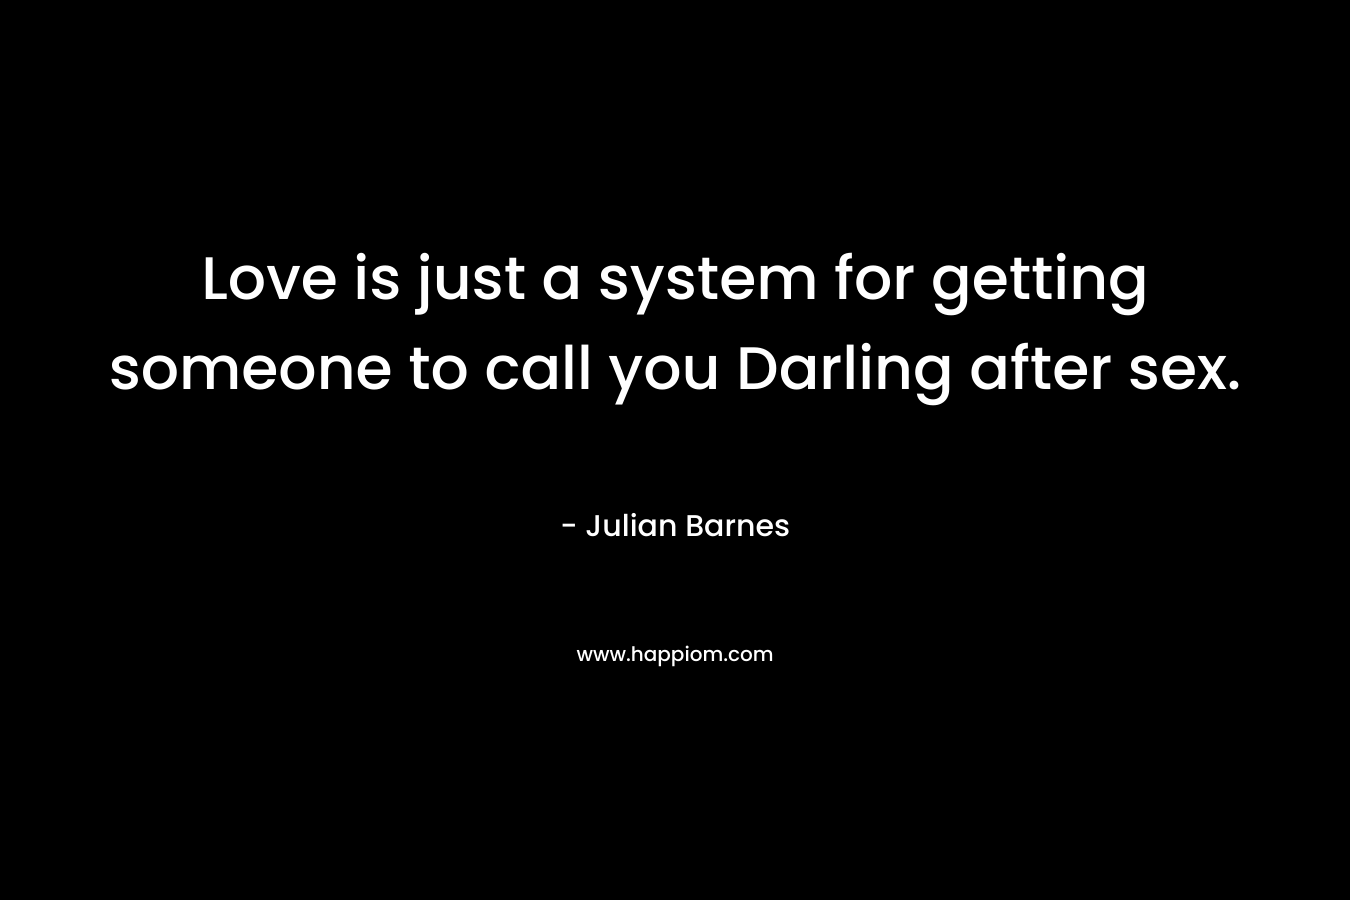 Love is just a system for getting someone to call you Darling after sex.